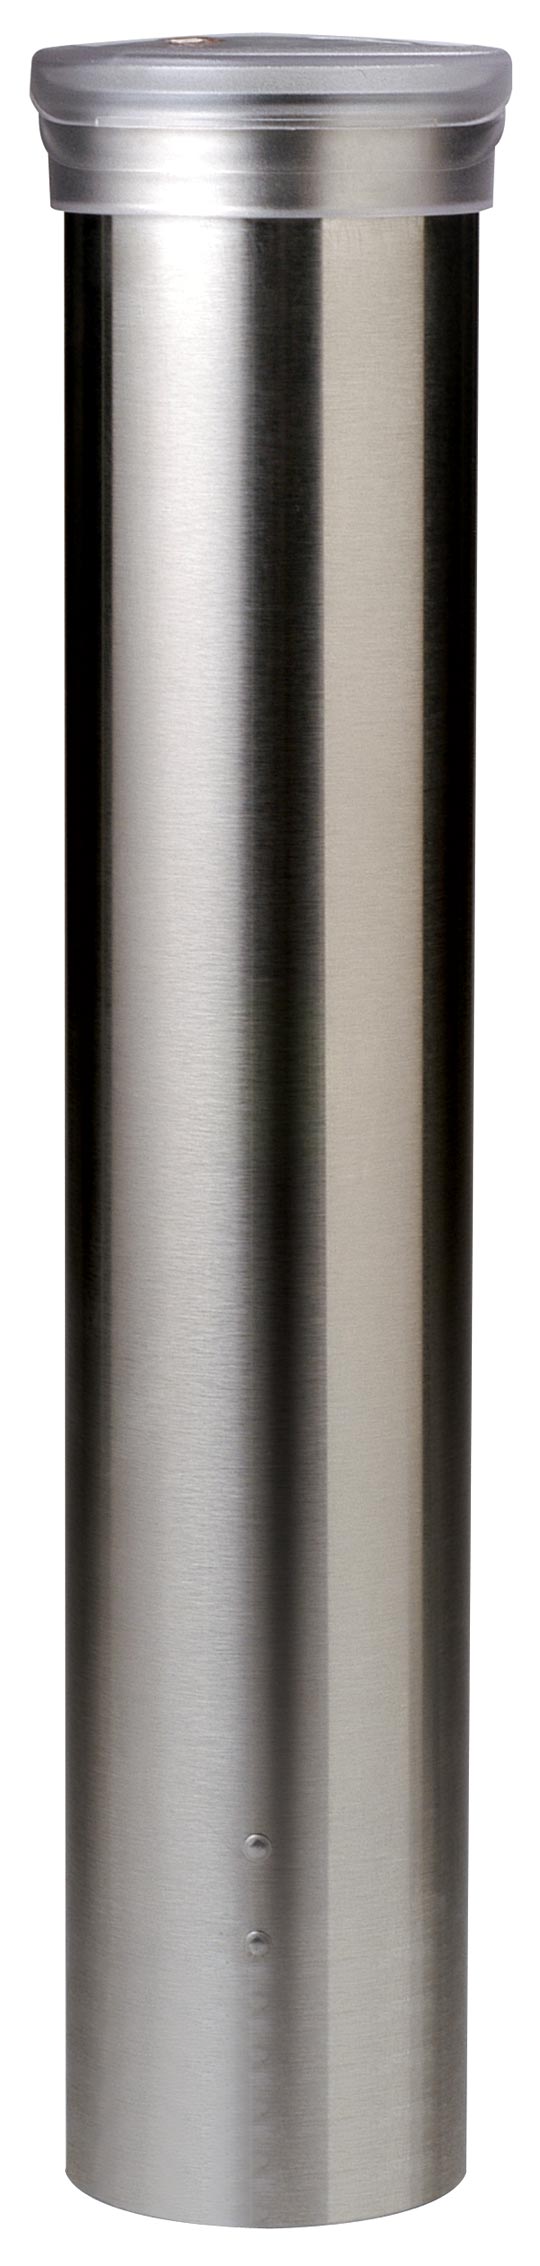 Stainless Steel Cup Dispenser